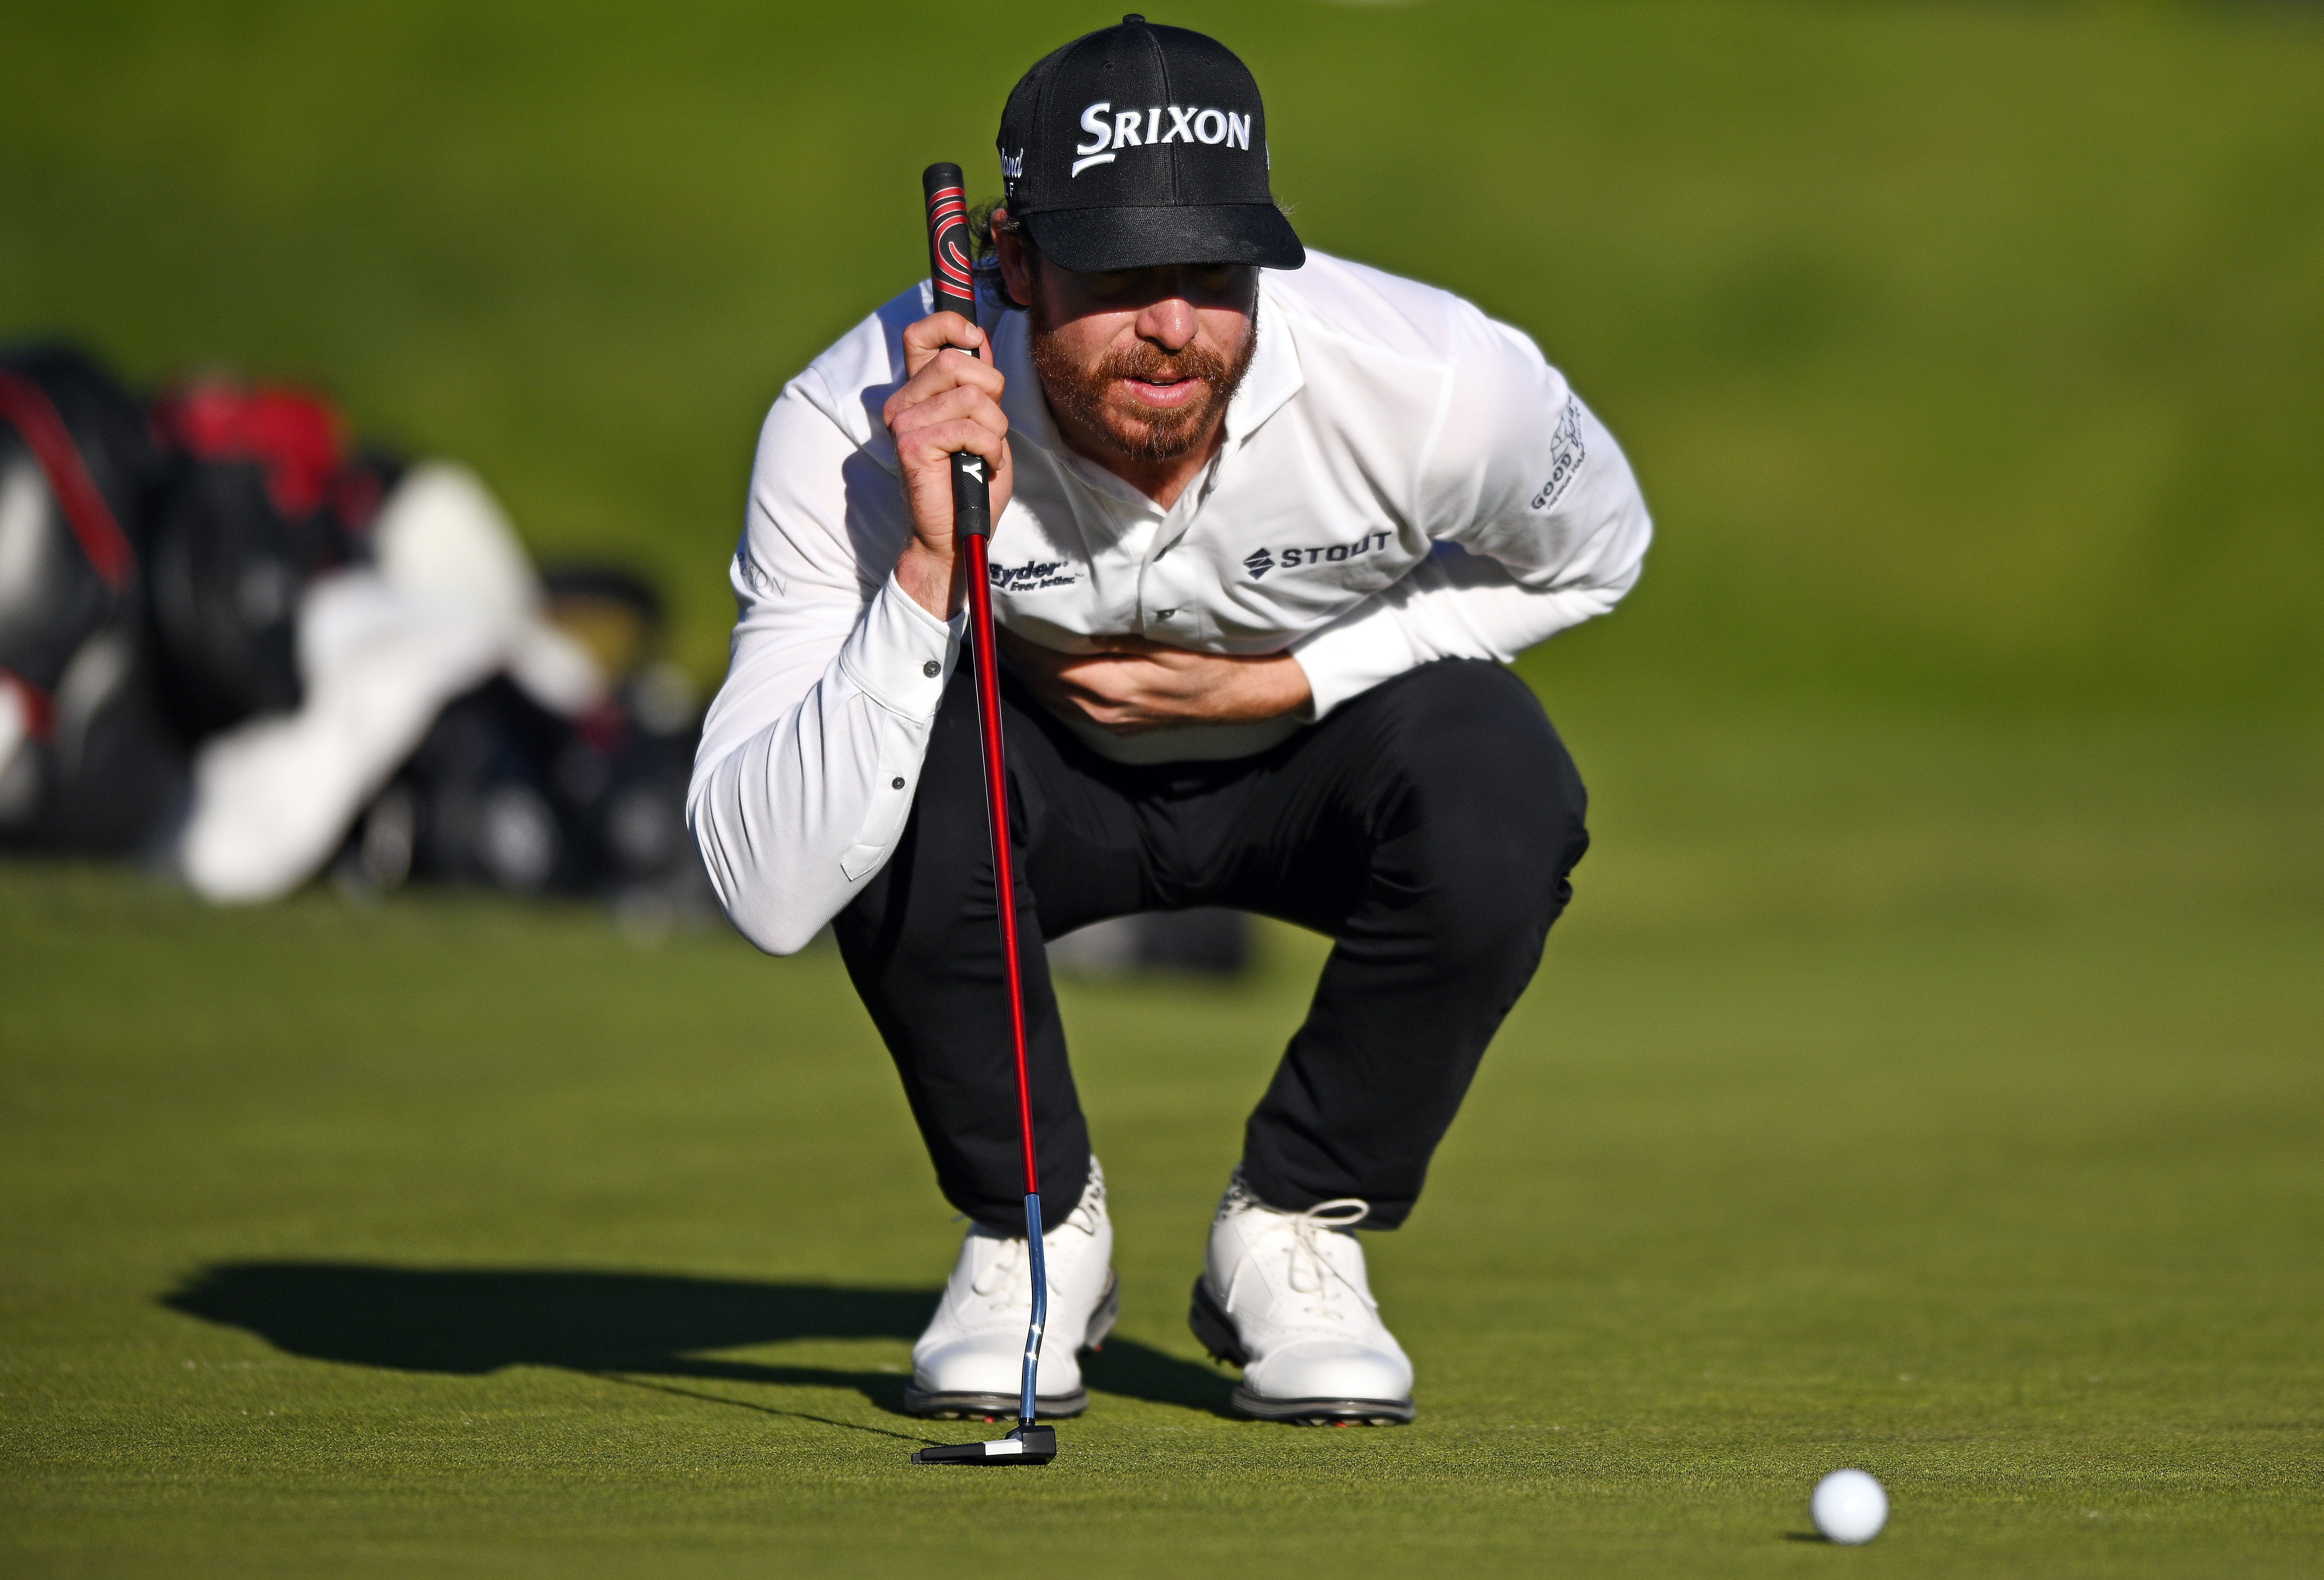 Sam Ryder of the United States lines up a putt on the 18th green of the South Course during the second round of the Farmers Insurance Open at Torrey Pines Golf Course on January 26, 2023 in La Jolla, California.